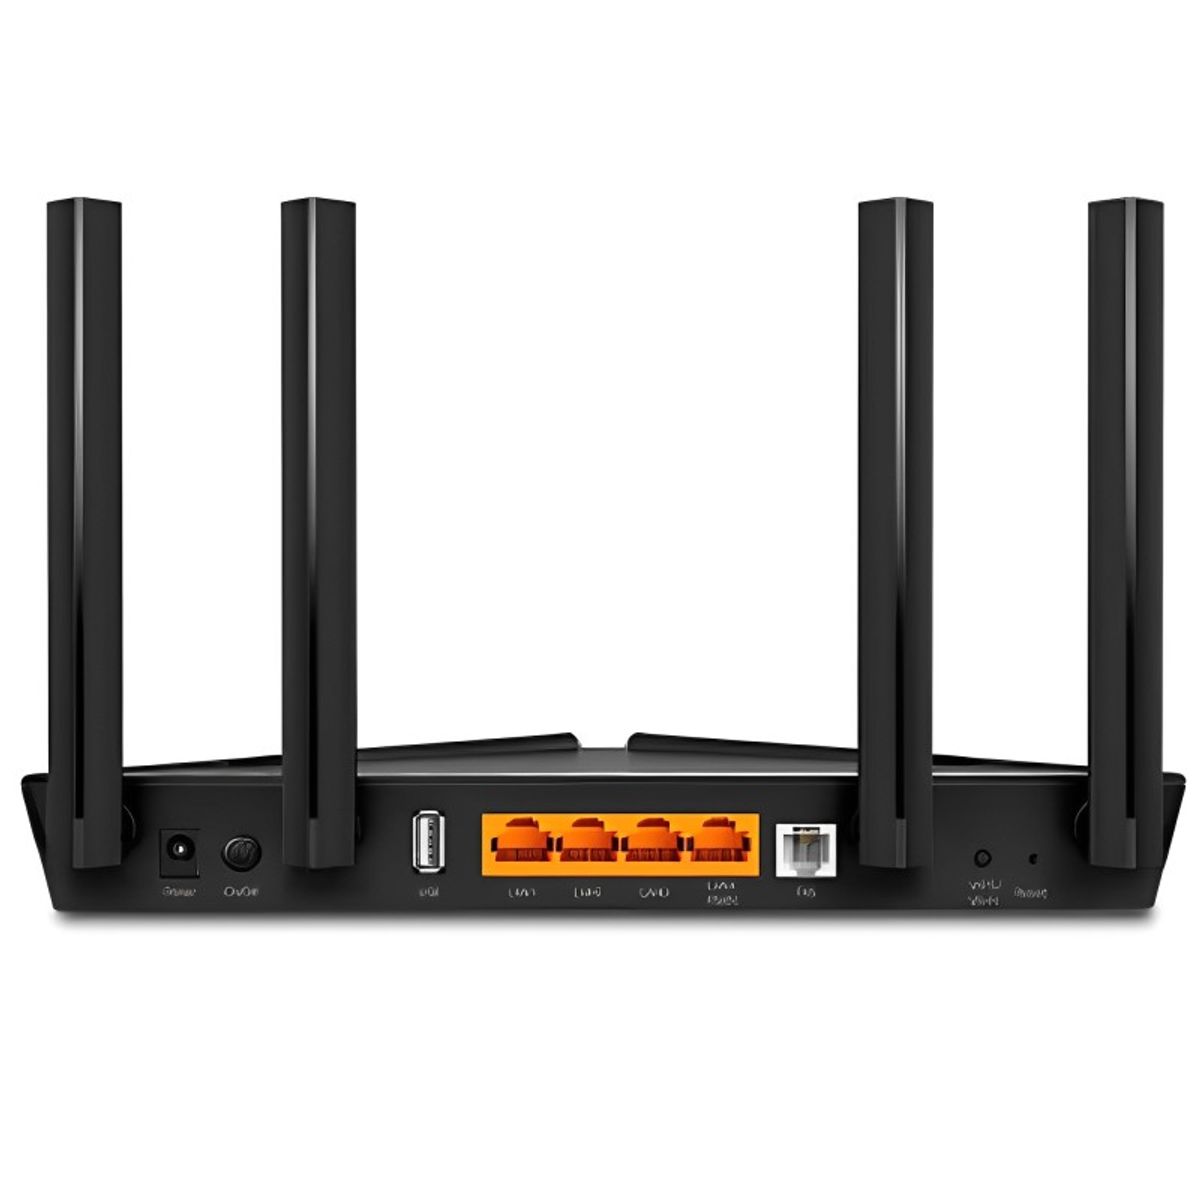 Roteador Tp-link, 1200 Mbps, 4 Antenas Ax1800, Wifi 6 - TPN0324                